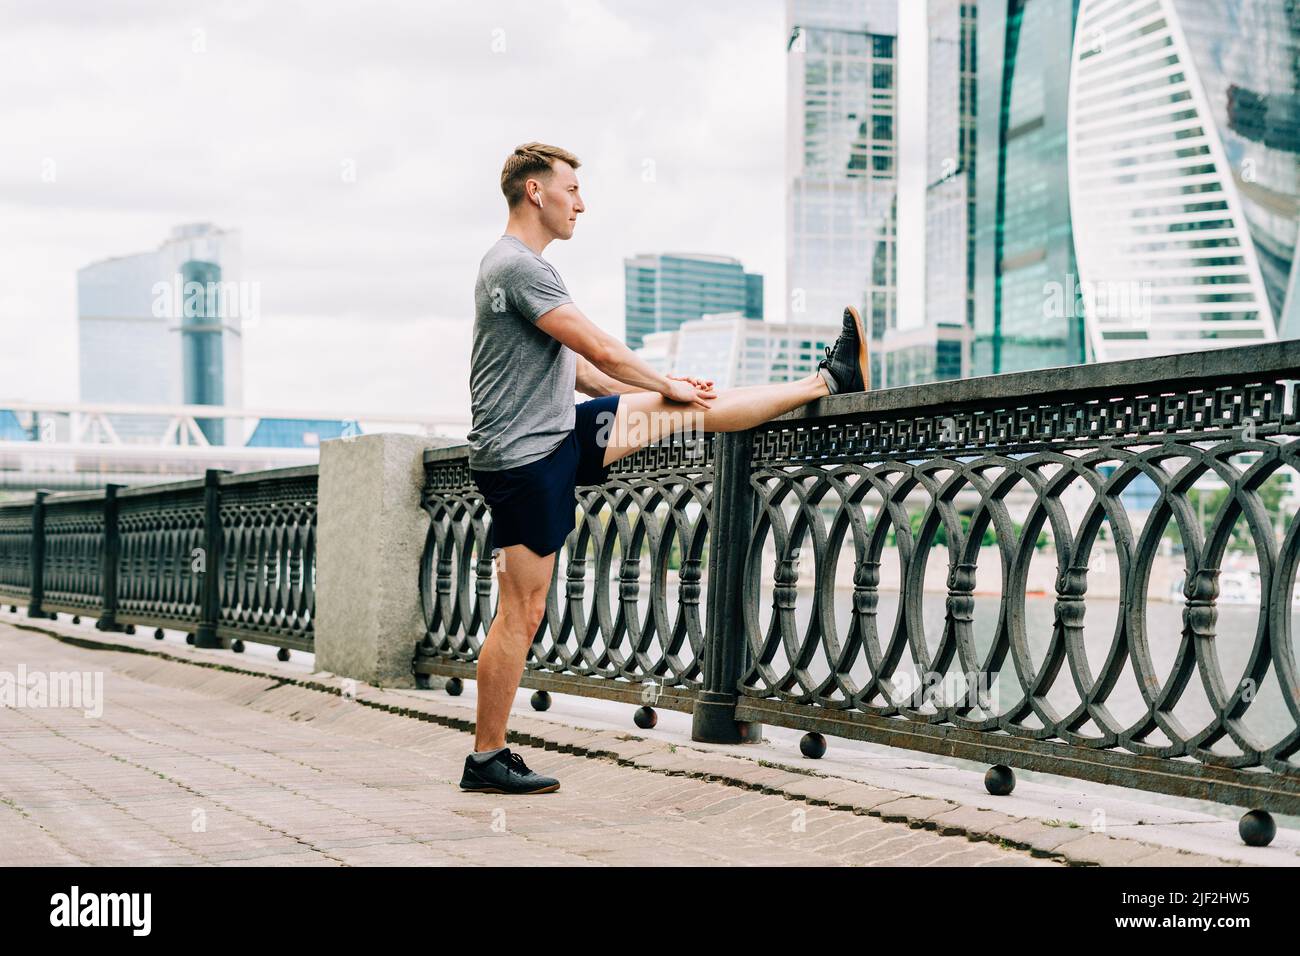 Young fitness man runner stretching legs before exercise run outdoors in city urban street. Healthy lifestyle and sport concept Stock Photo